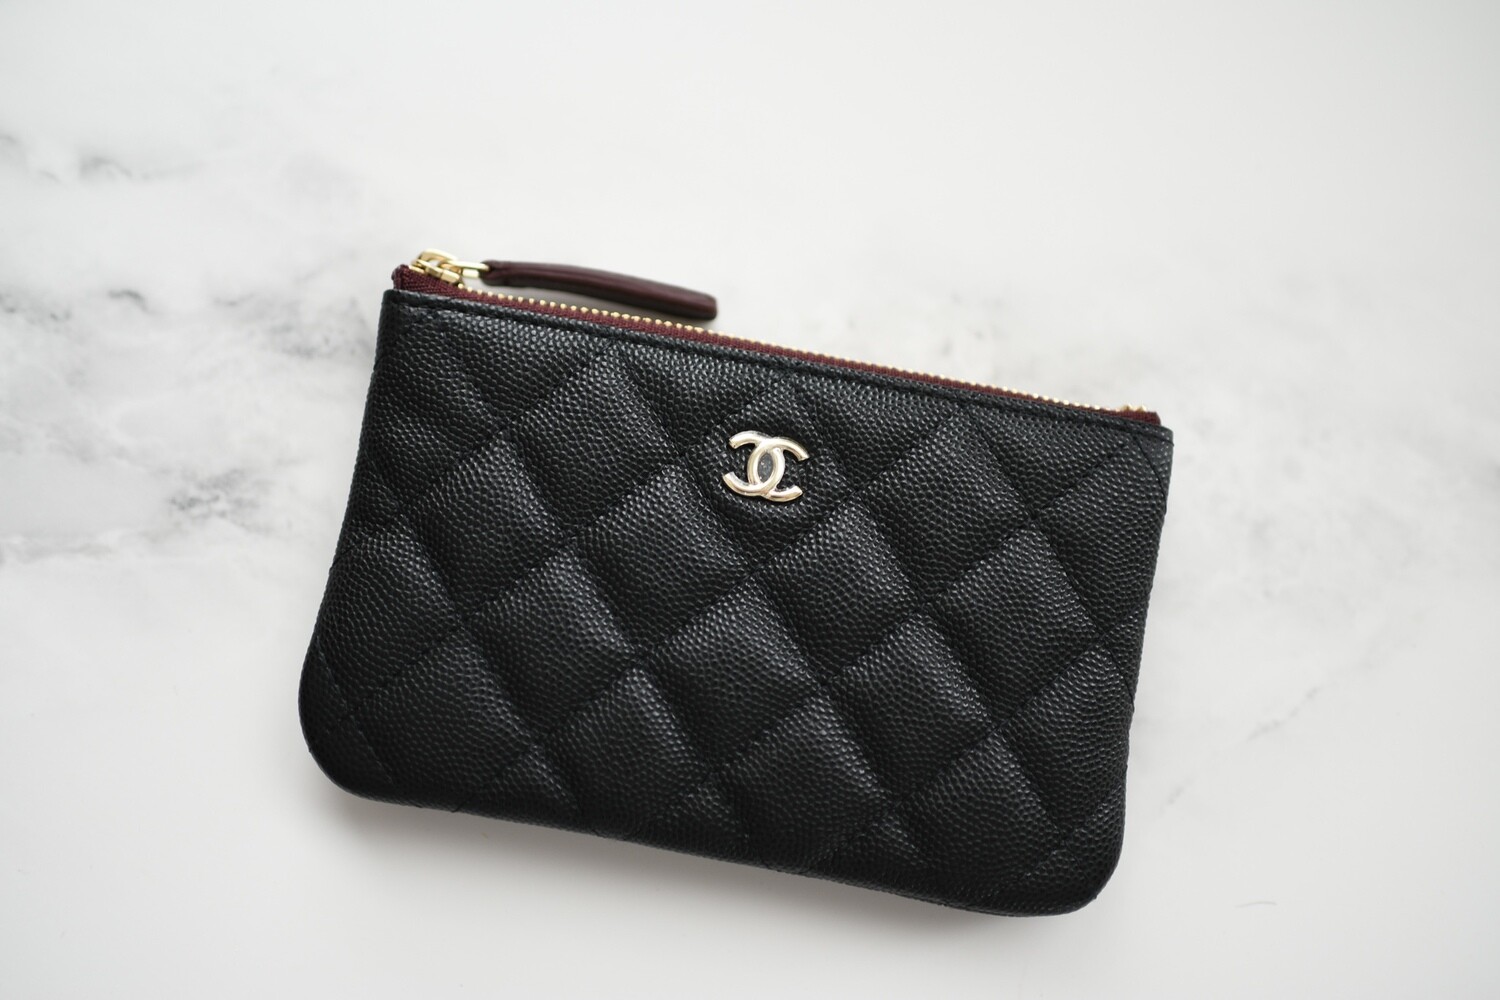 Chanel Small O Case, Gold Goatskin Leather with Gold Hardware, New in Box  GA002